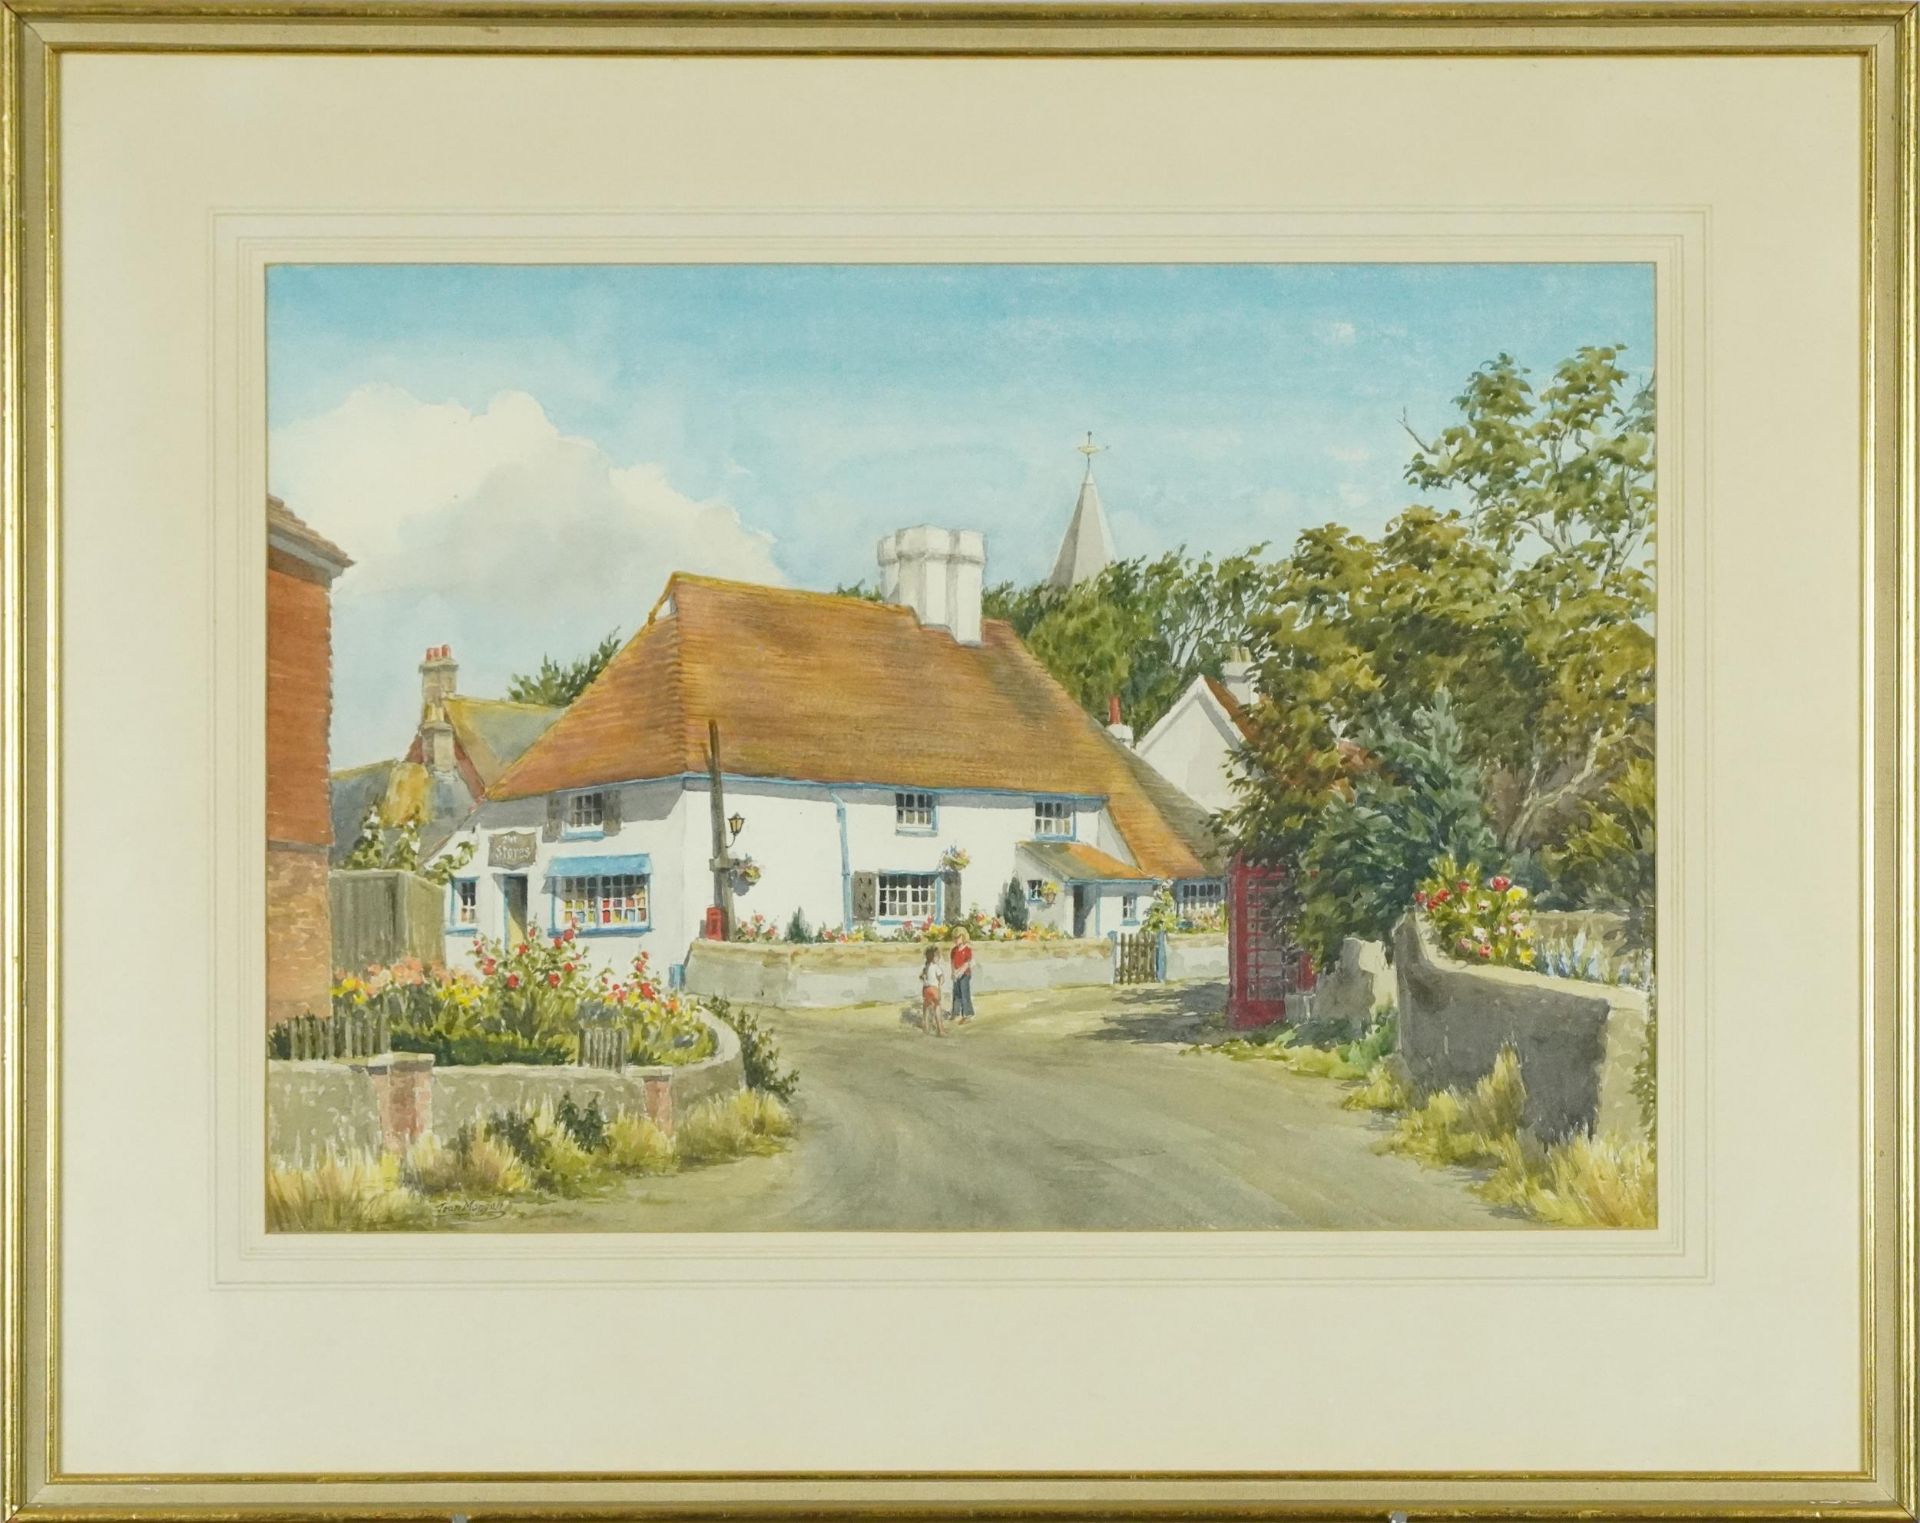 Joan Morgan - Street scene with children and letterbox, contemporary watercolour, mounted, framed - Image 2 of 4